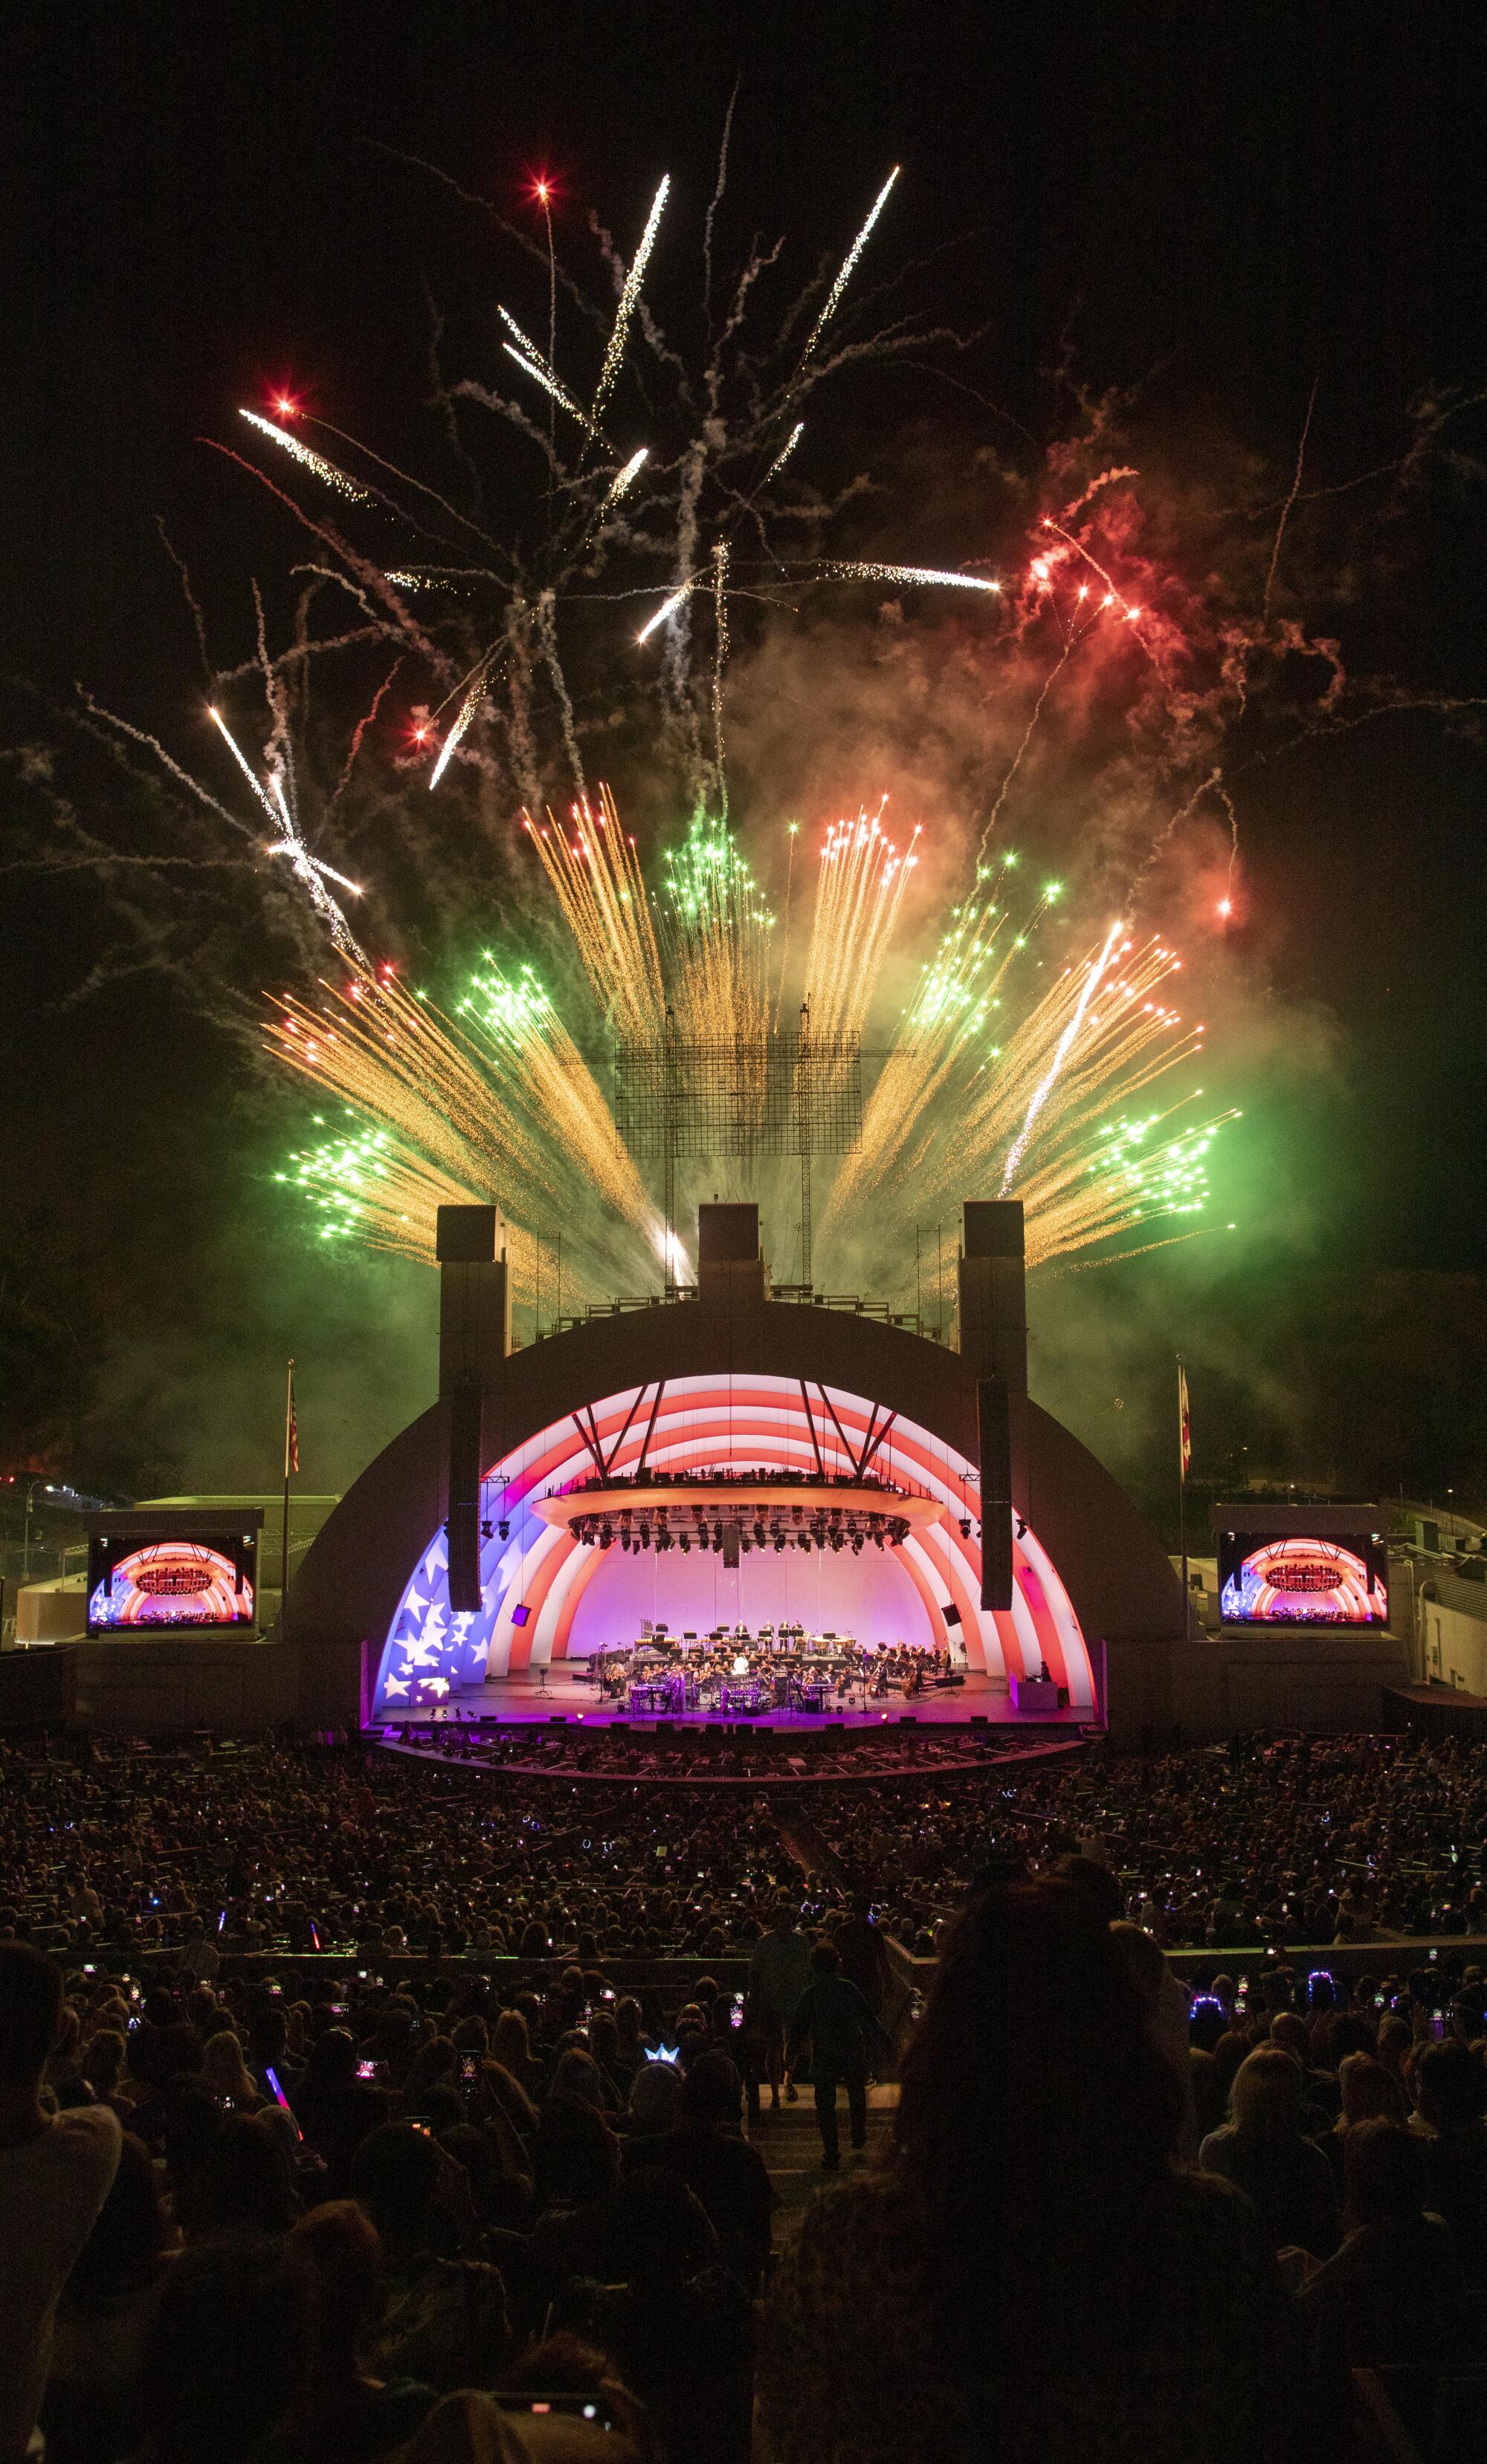 A flag motif in a rainbow shape fills the shell of the Bowl as fireworks explode above.